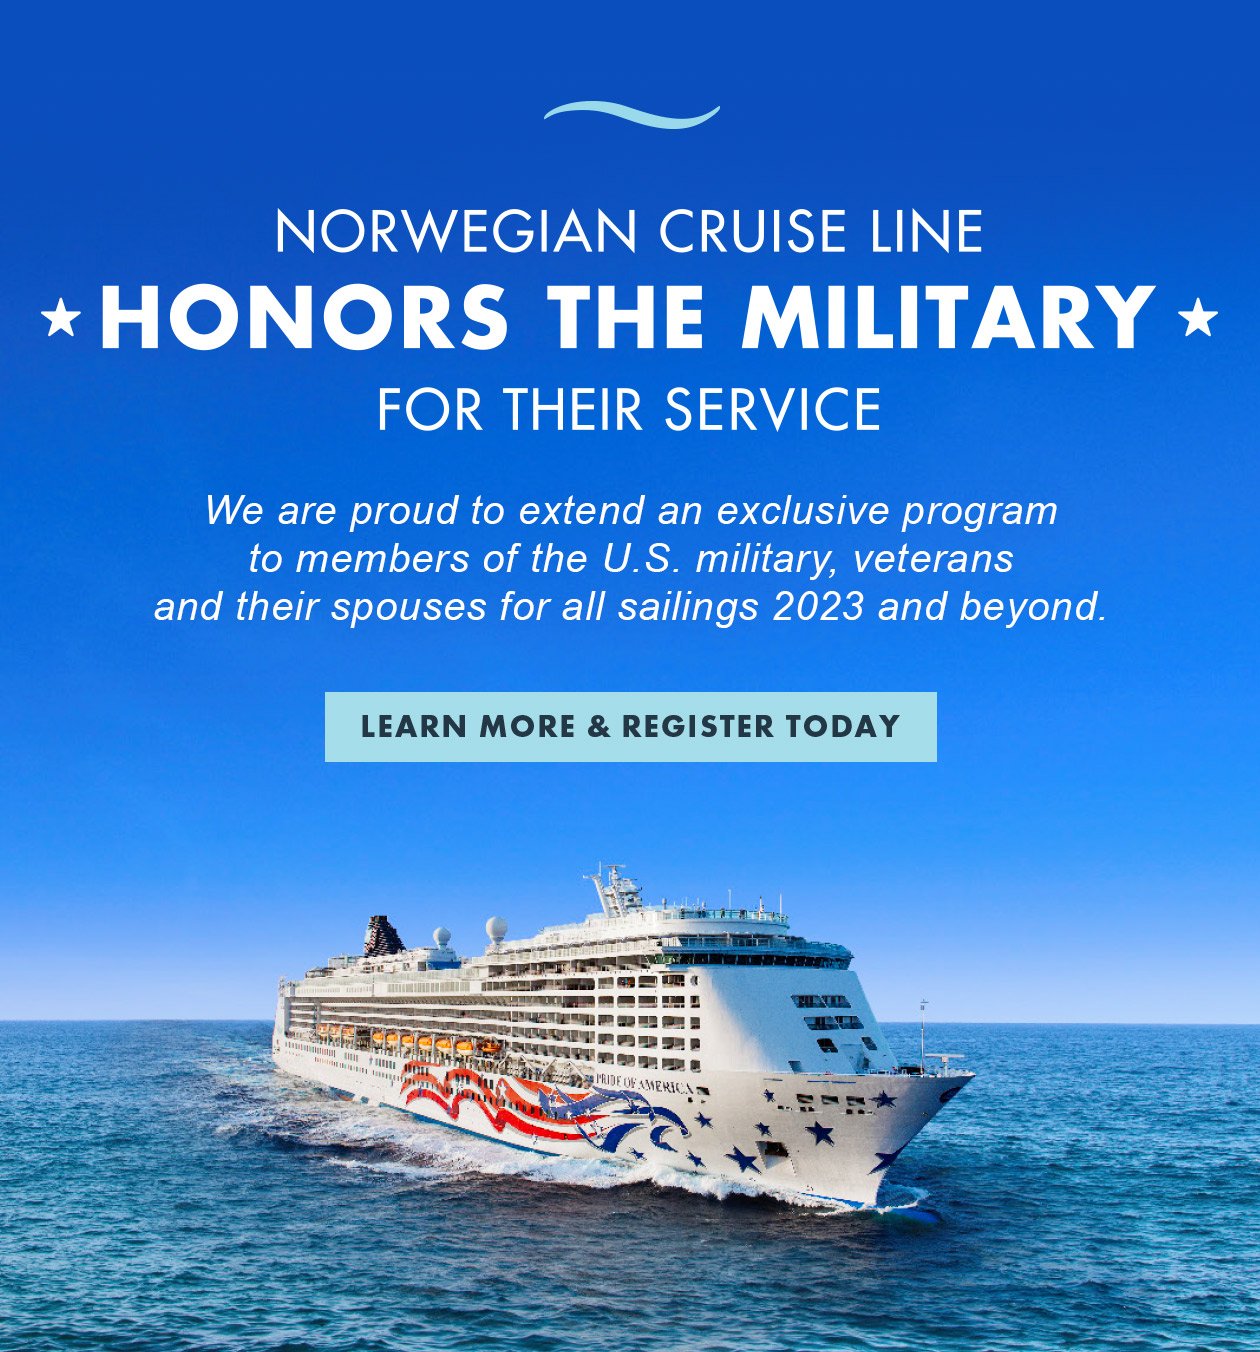 Norwegian Cruise Line honors the military for their service